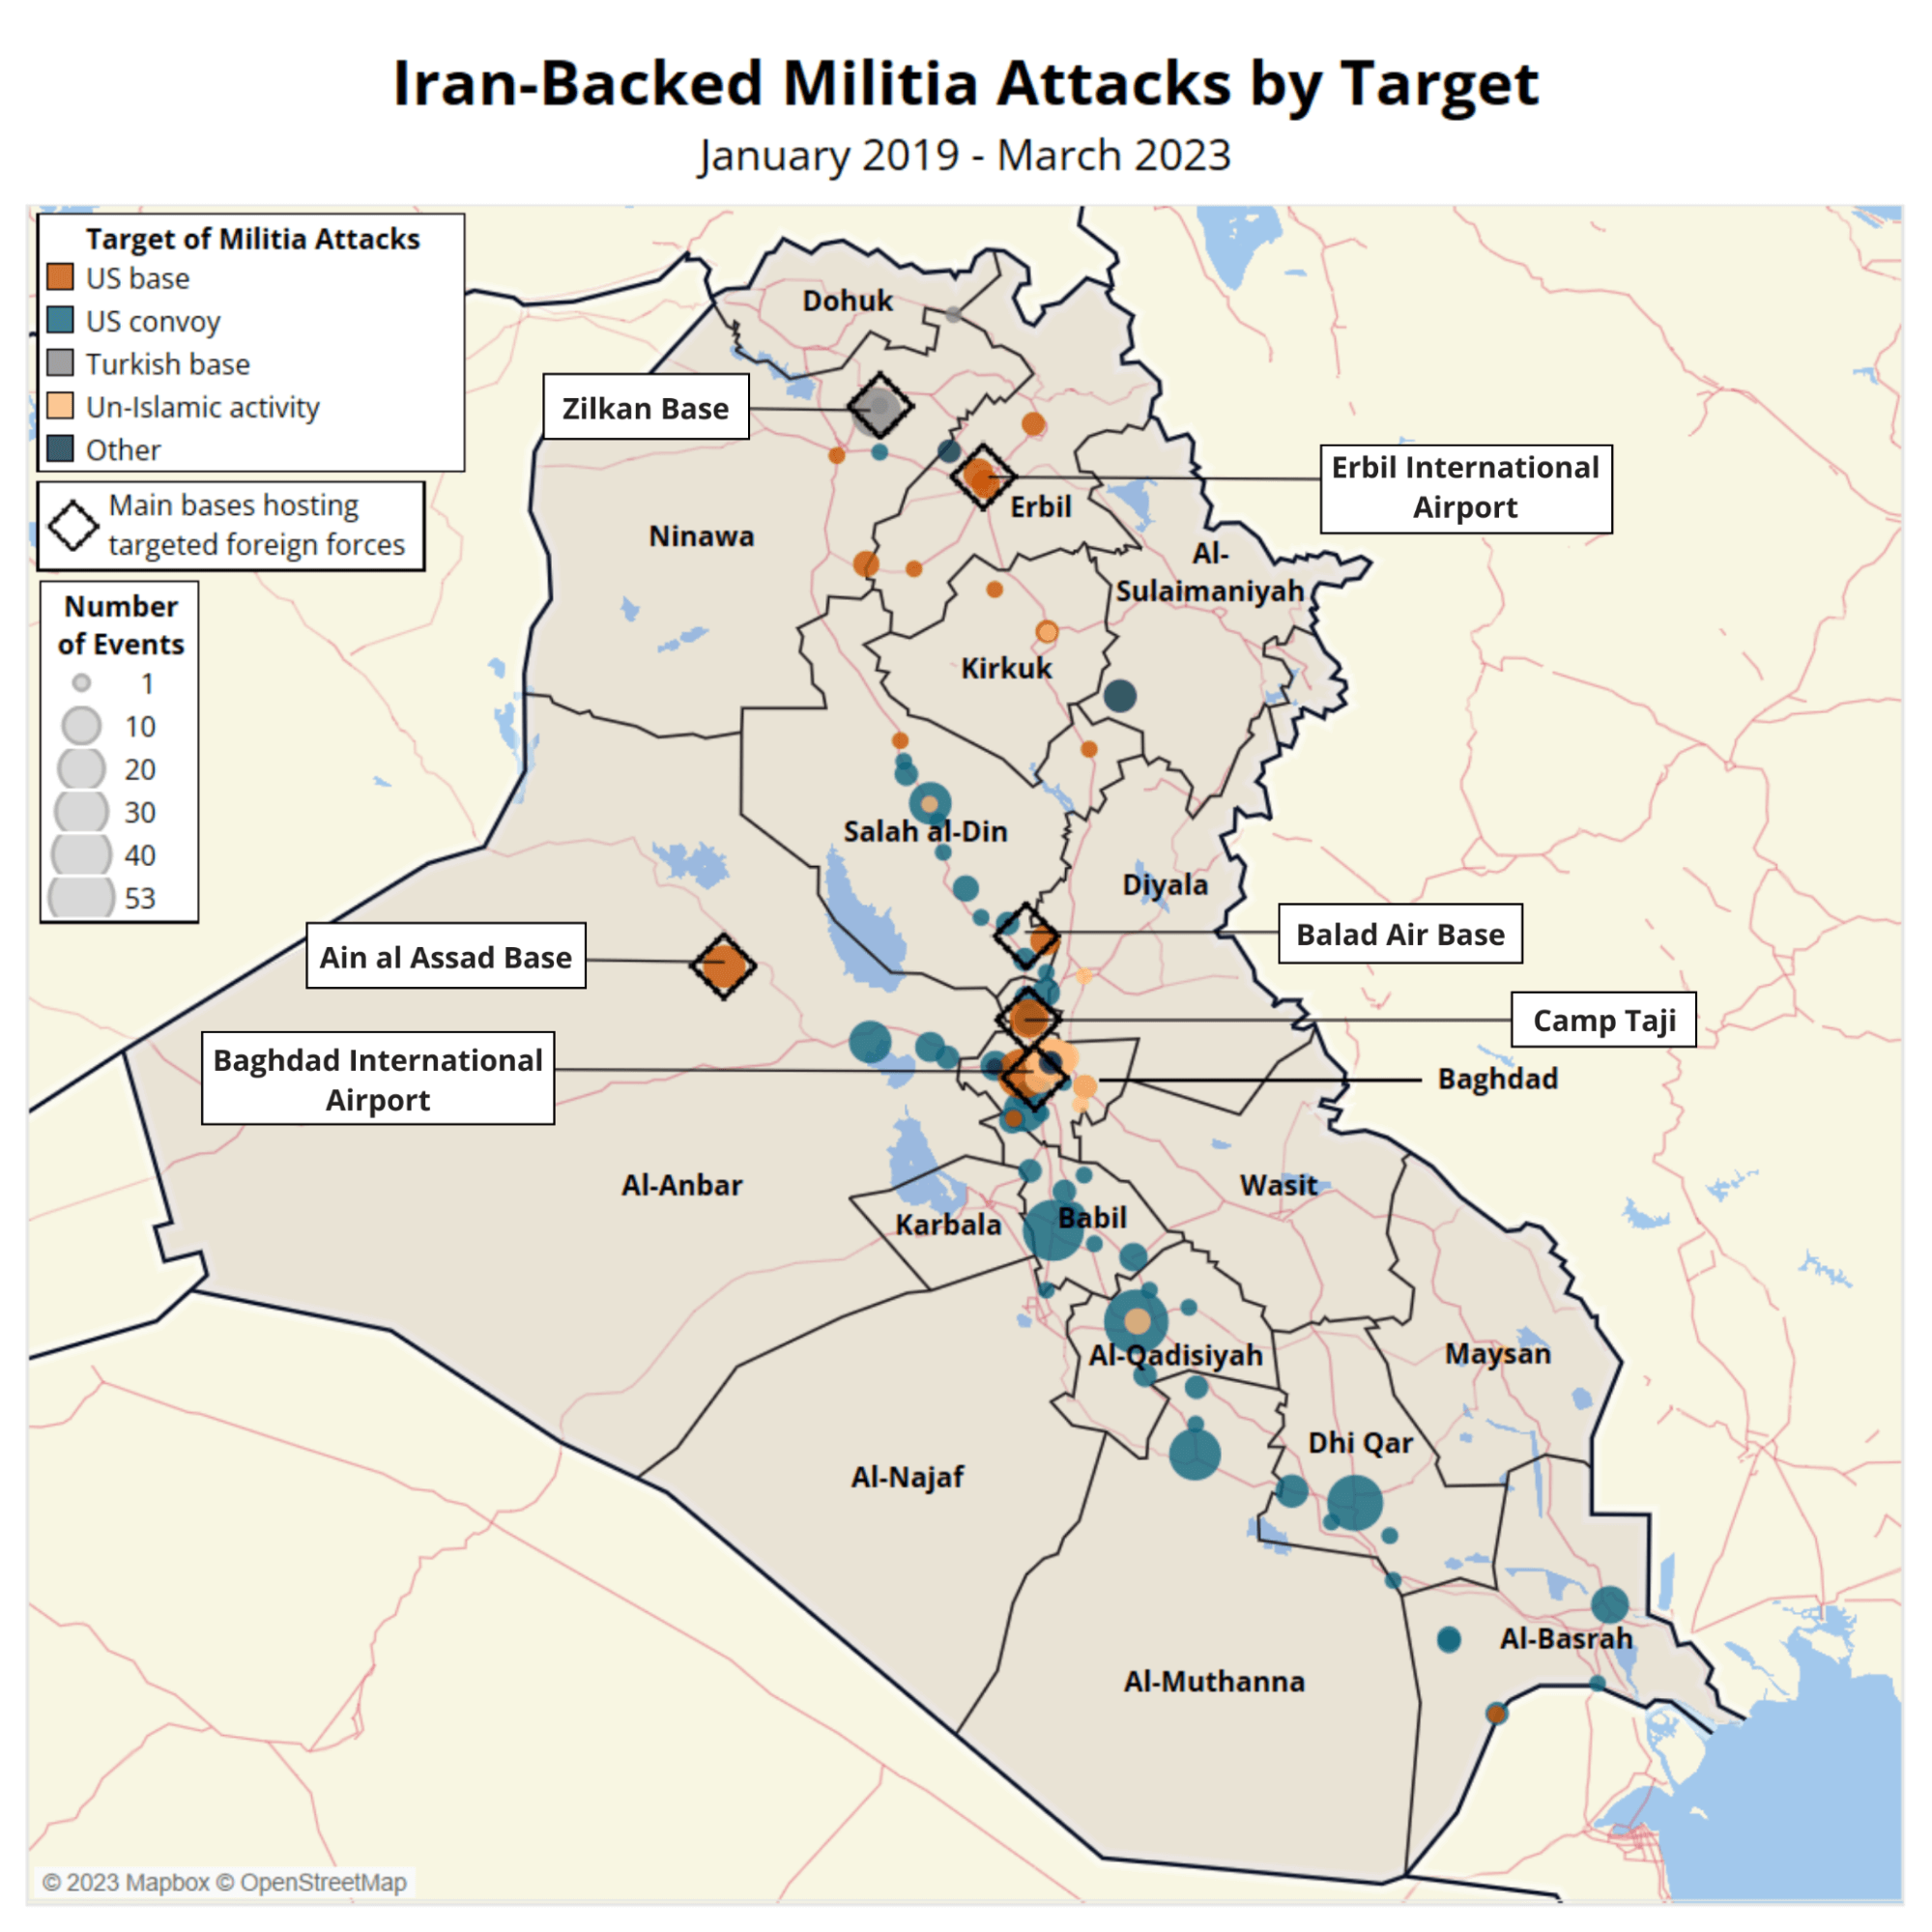 Map of iraq showing attacks by iran-based militia, color coded by target type